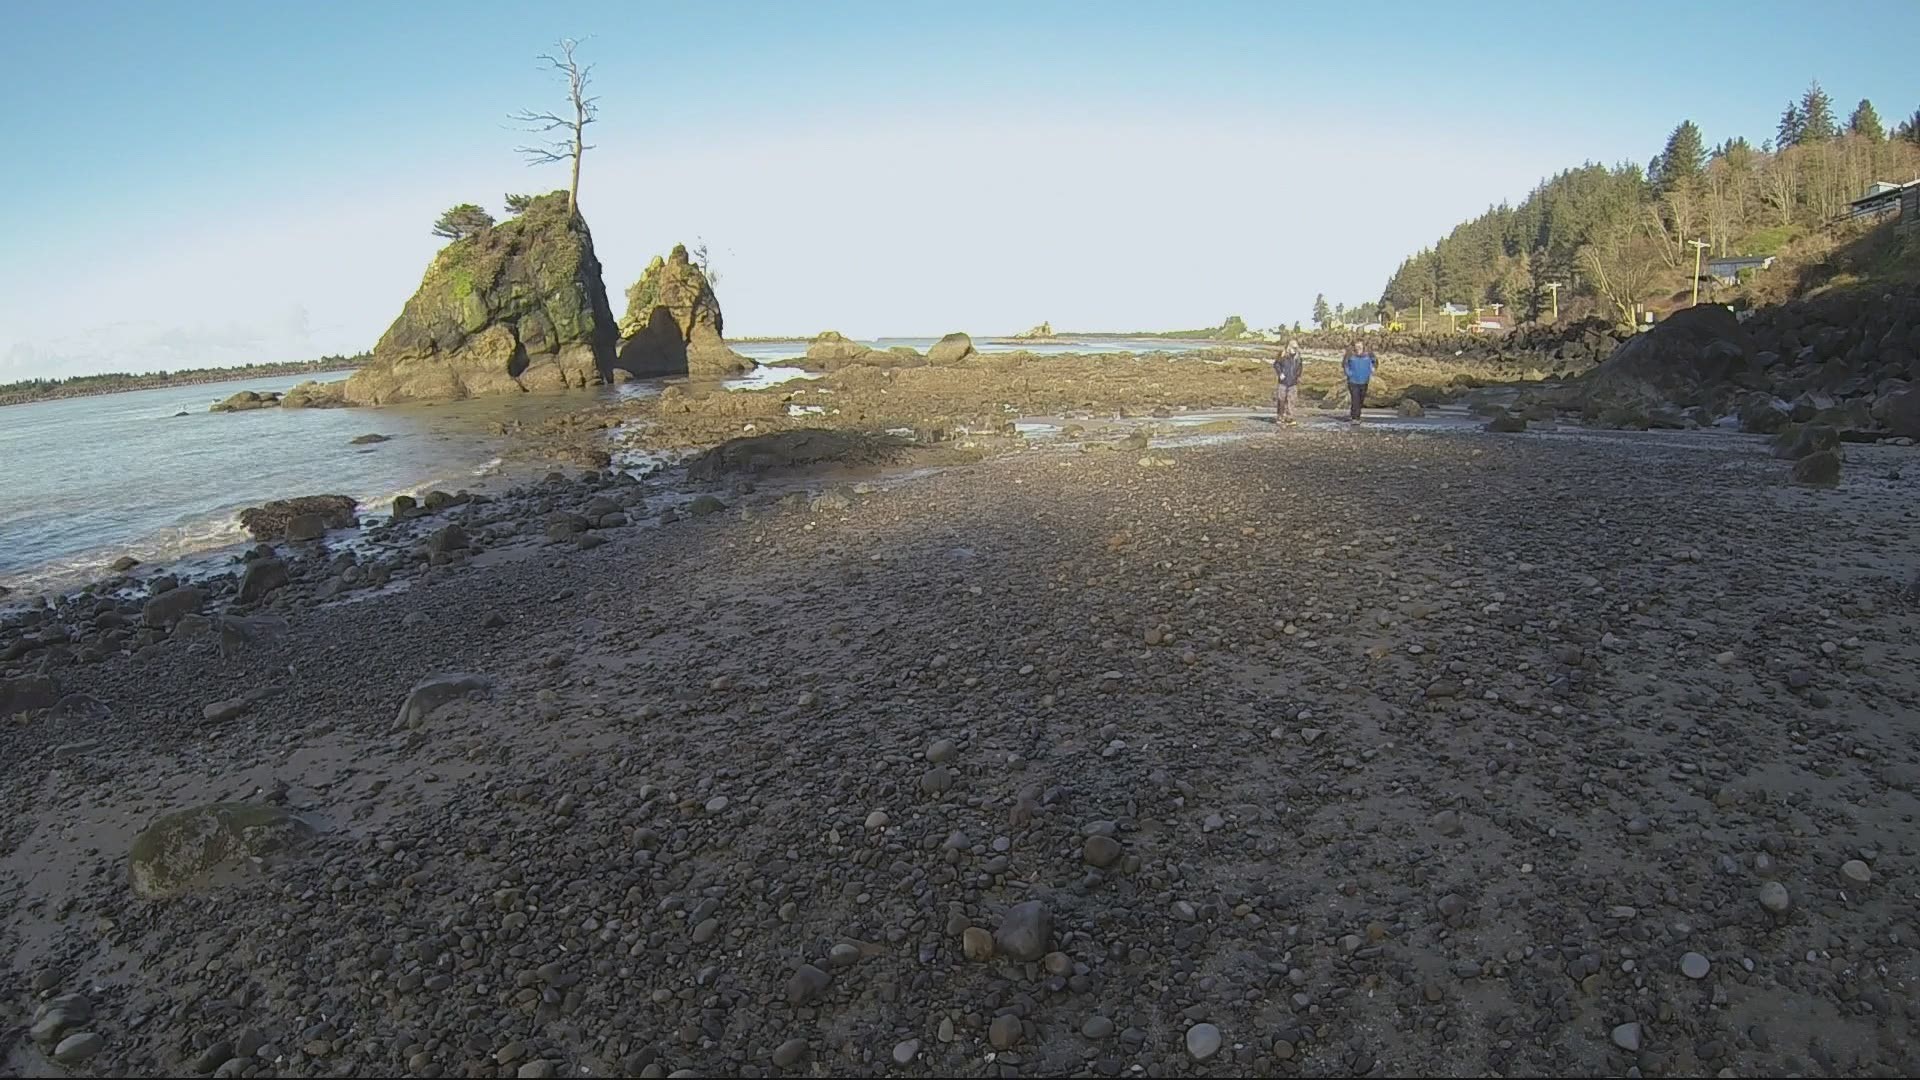 Grant takes us on a journey to see the wonders of the Oregon coast.